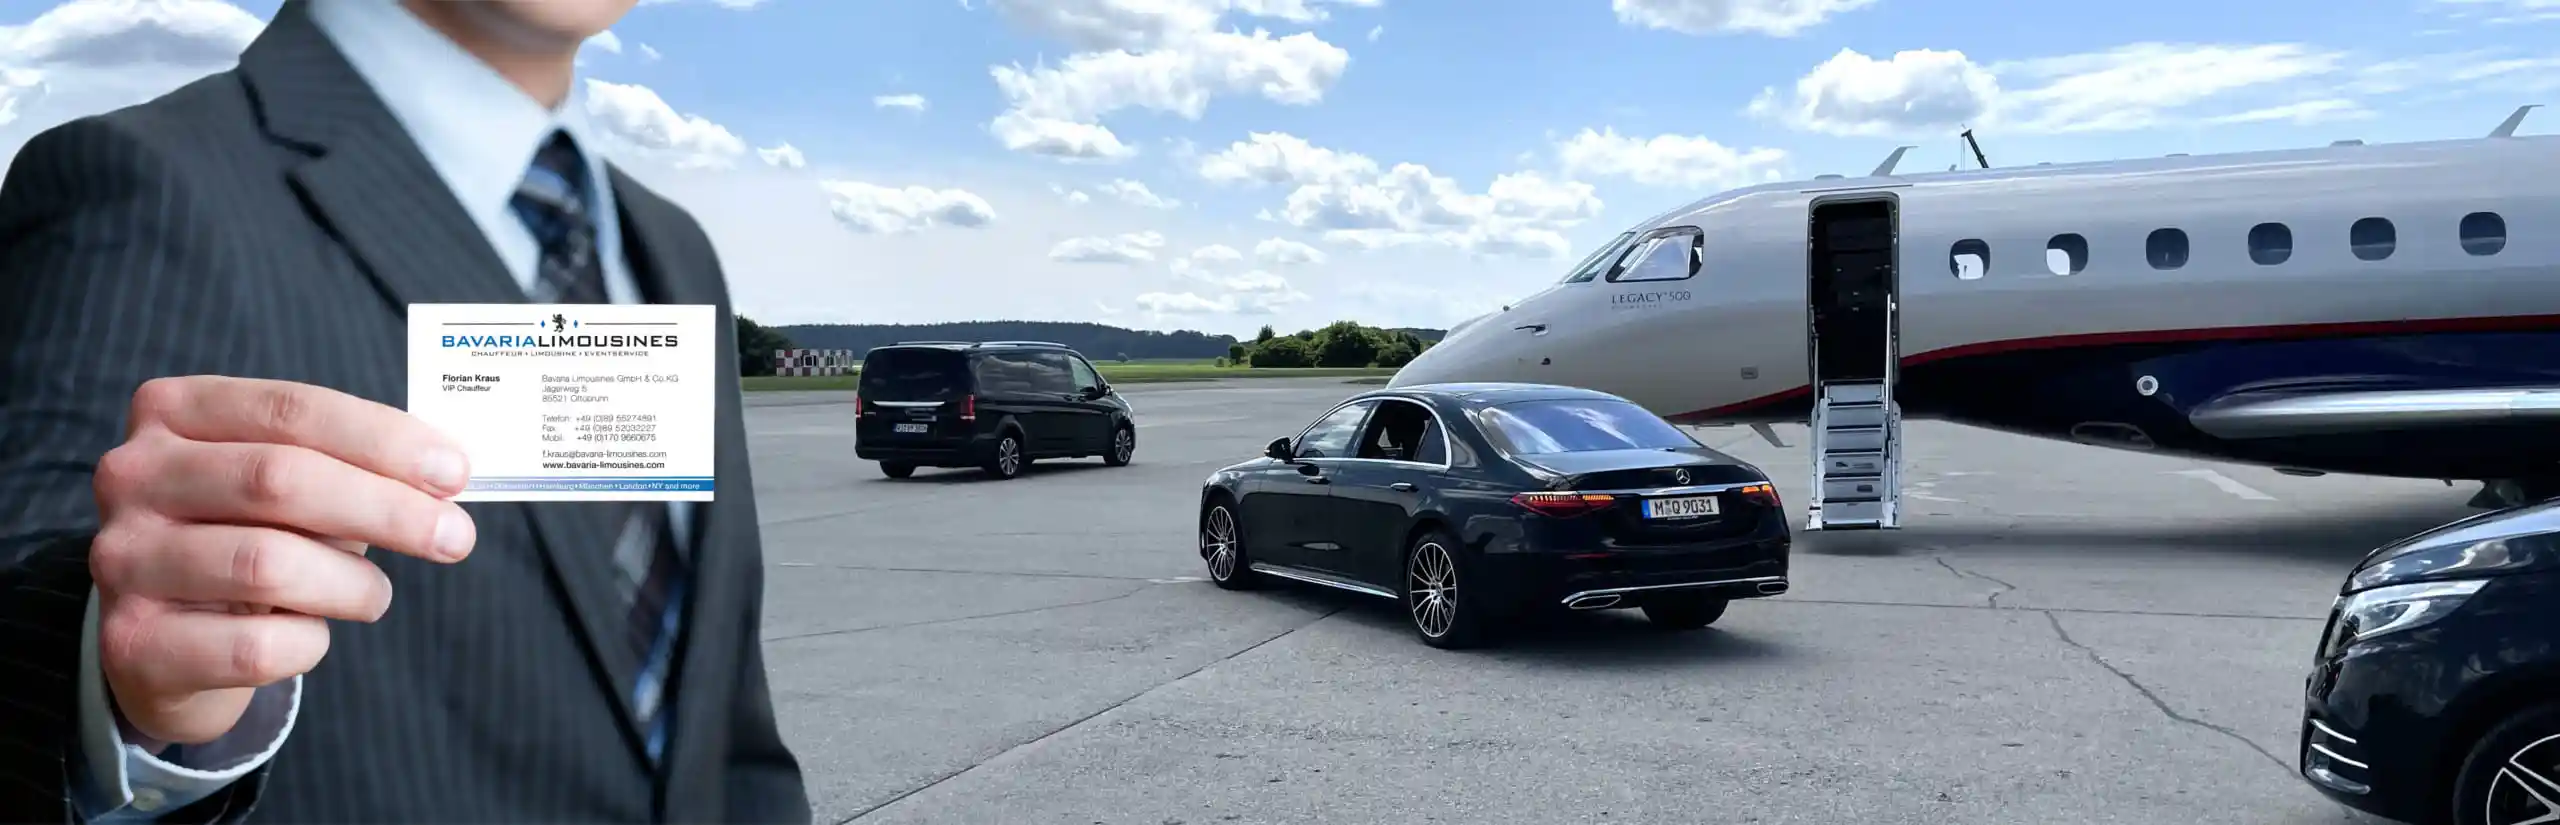 Limousine service in Munich and all over Germany